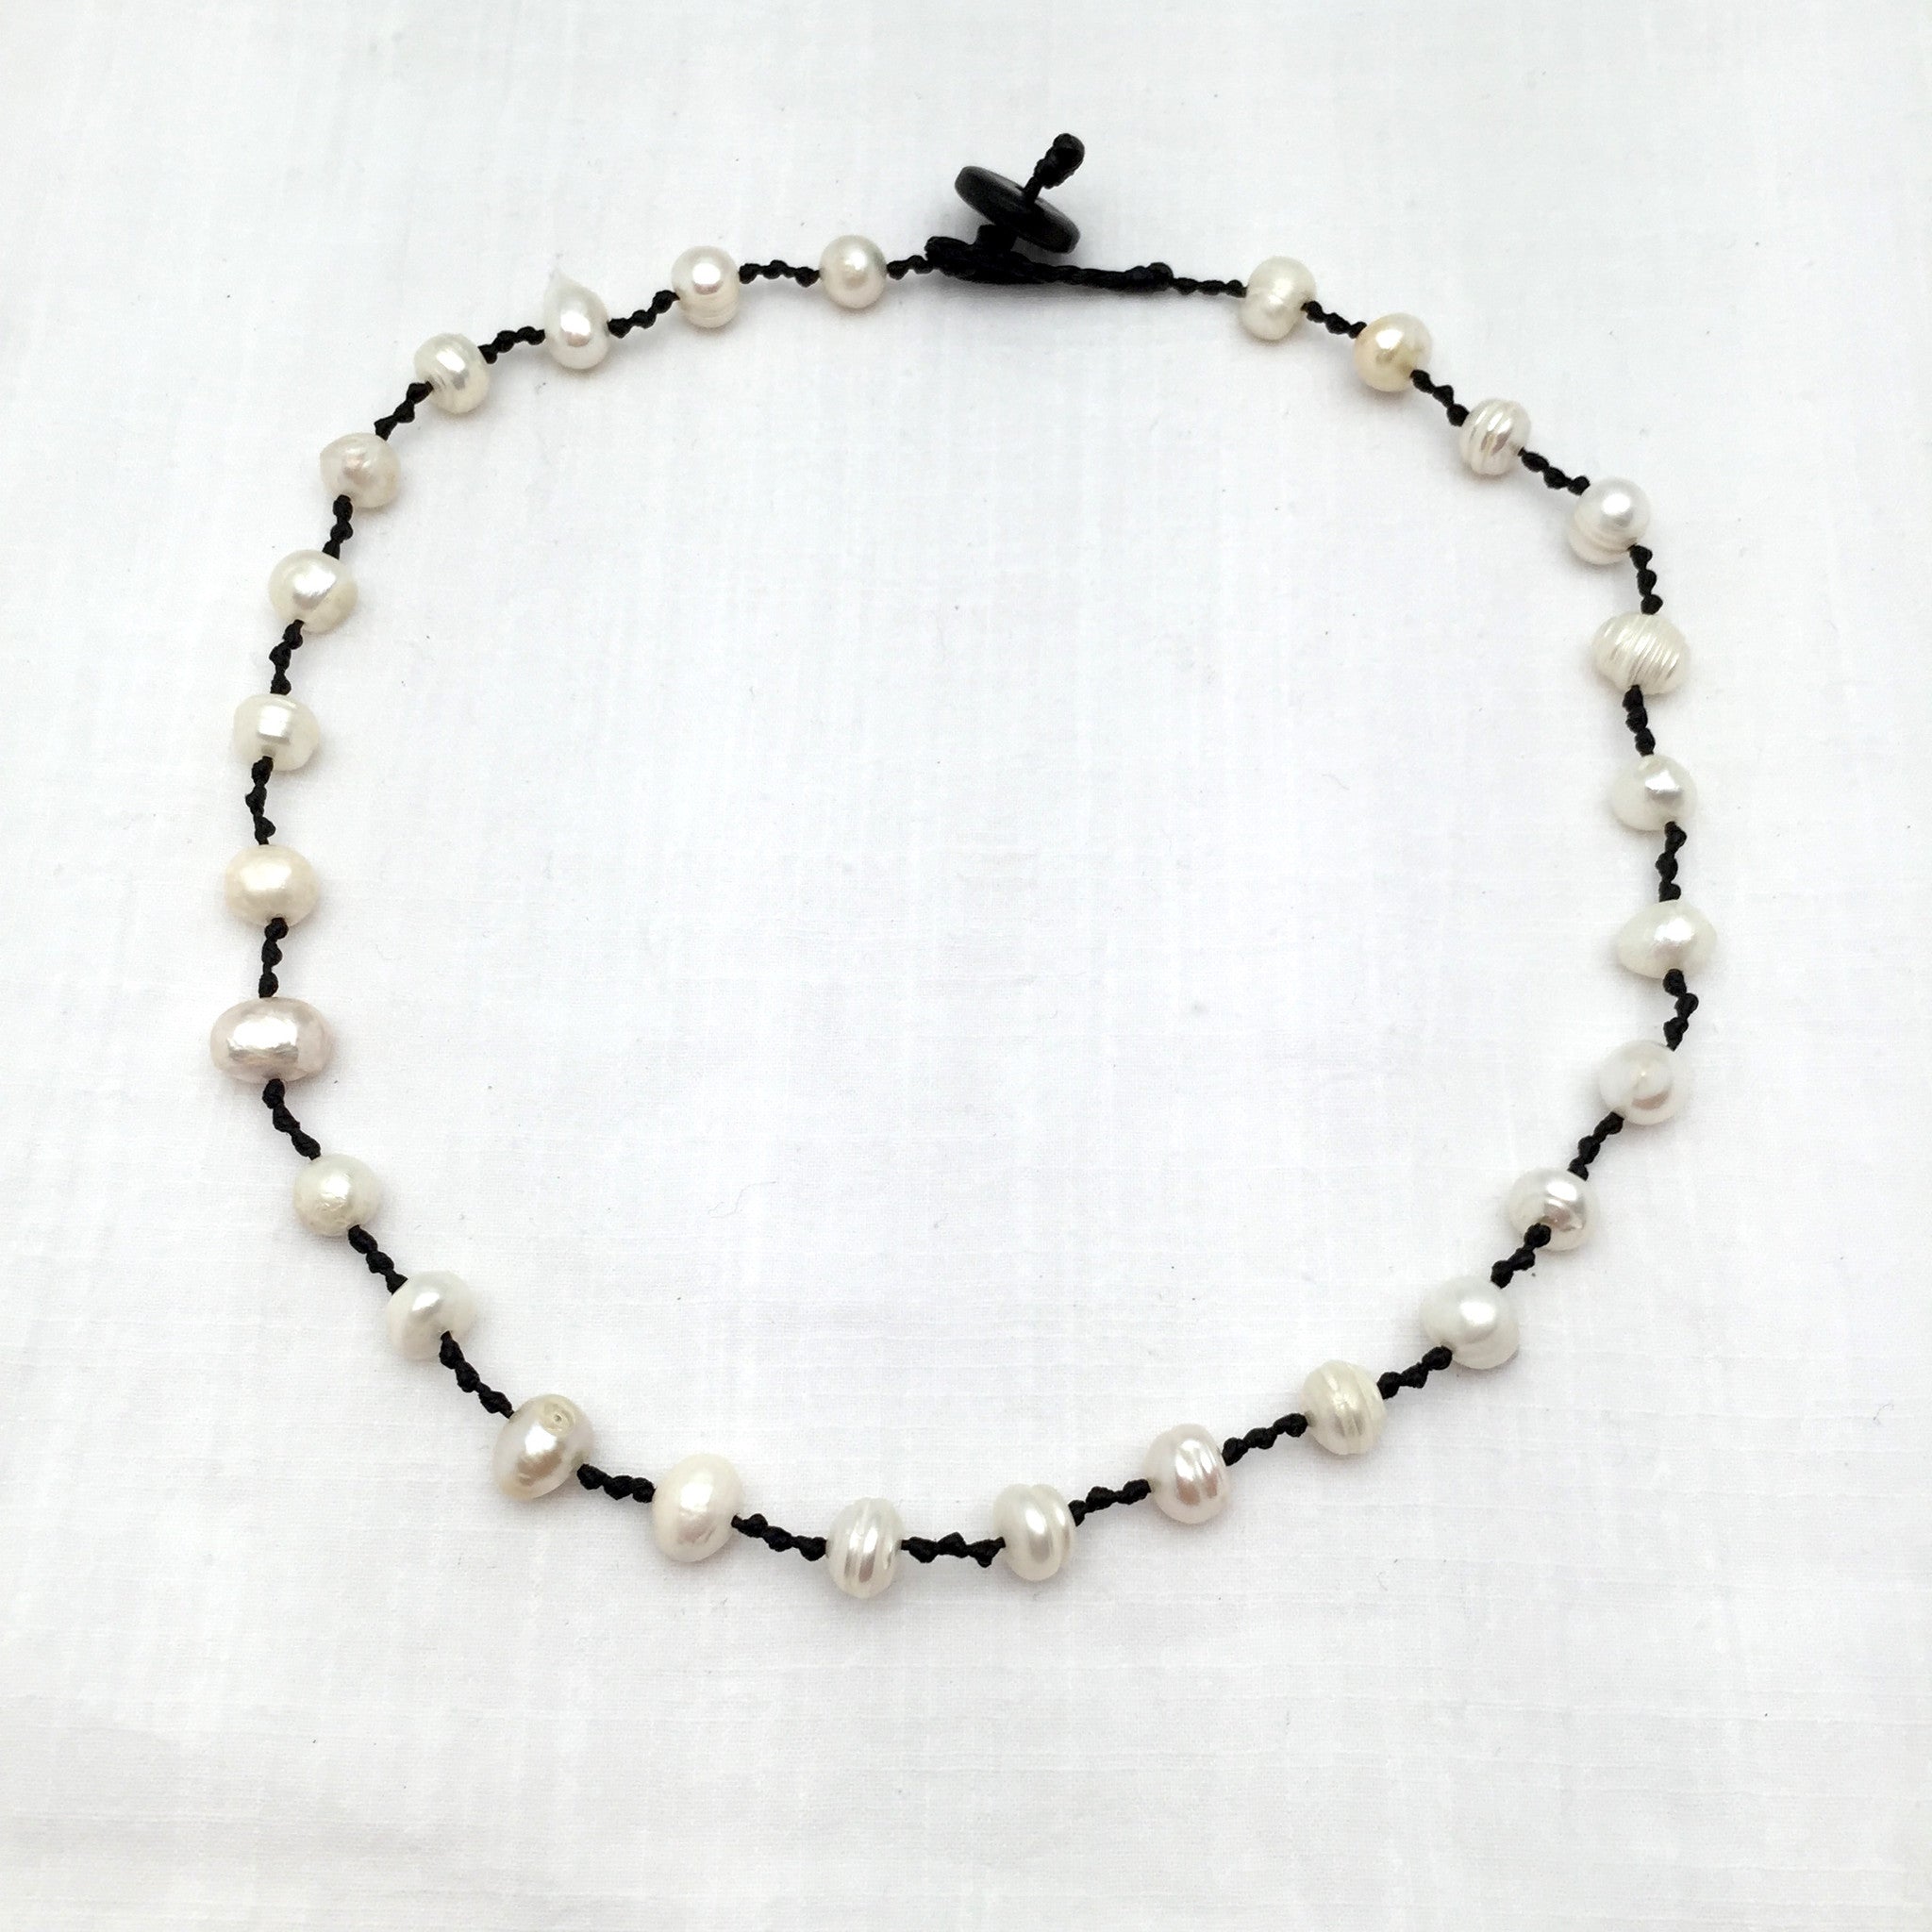 Magdalena Knotted Pearl Necklace